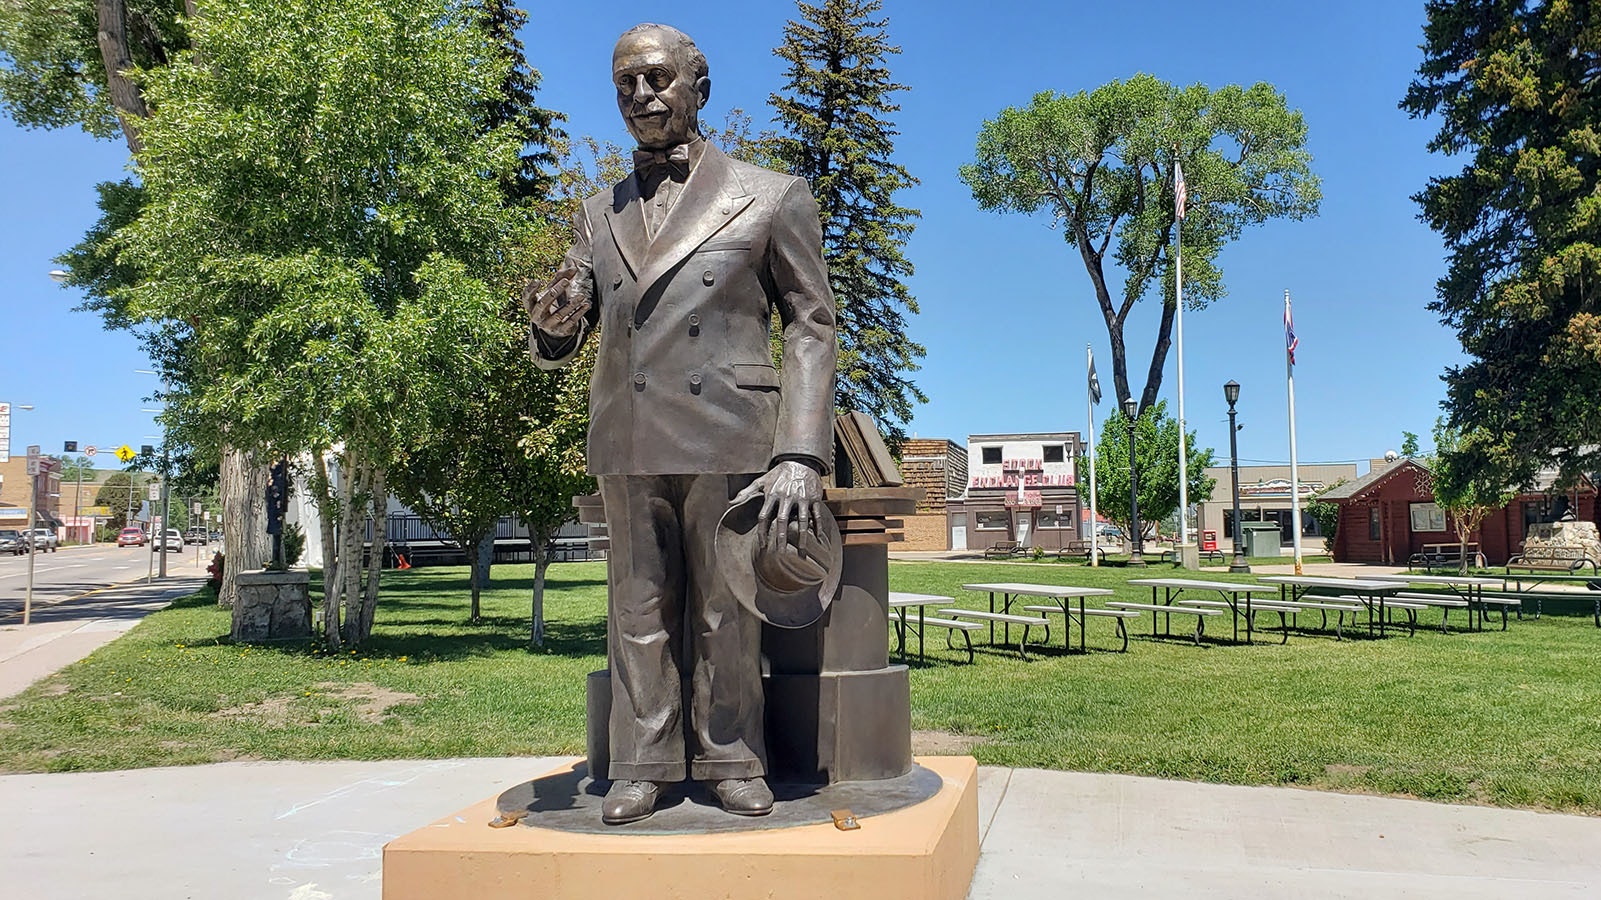 A statue of James Cash Penney, who founded JCPenney, stands in Kemmerer, Wyoming.